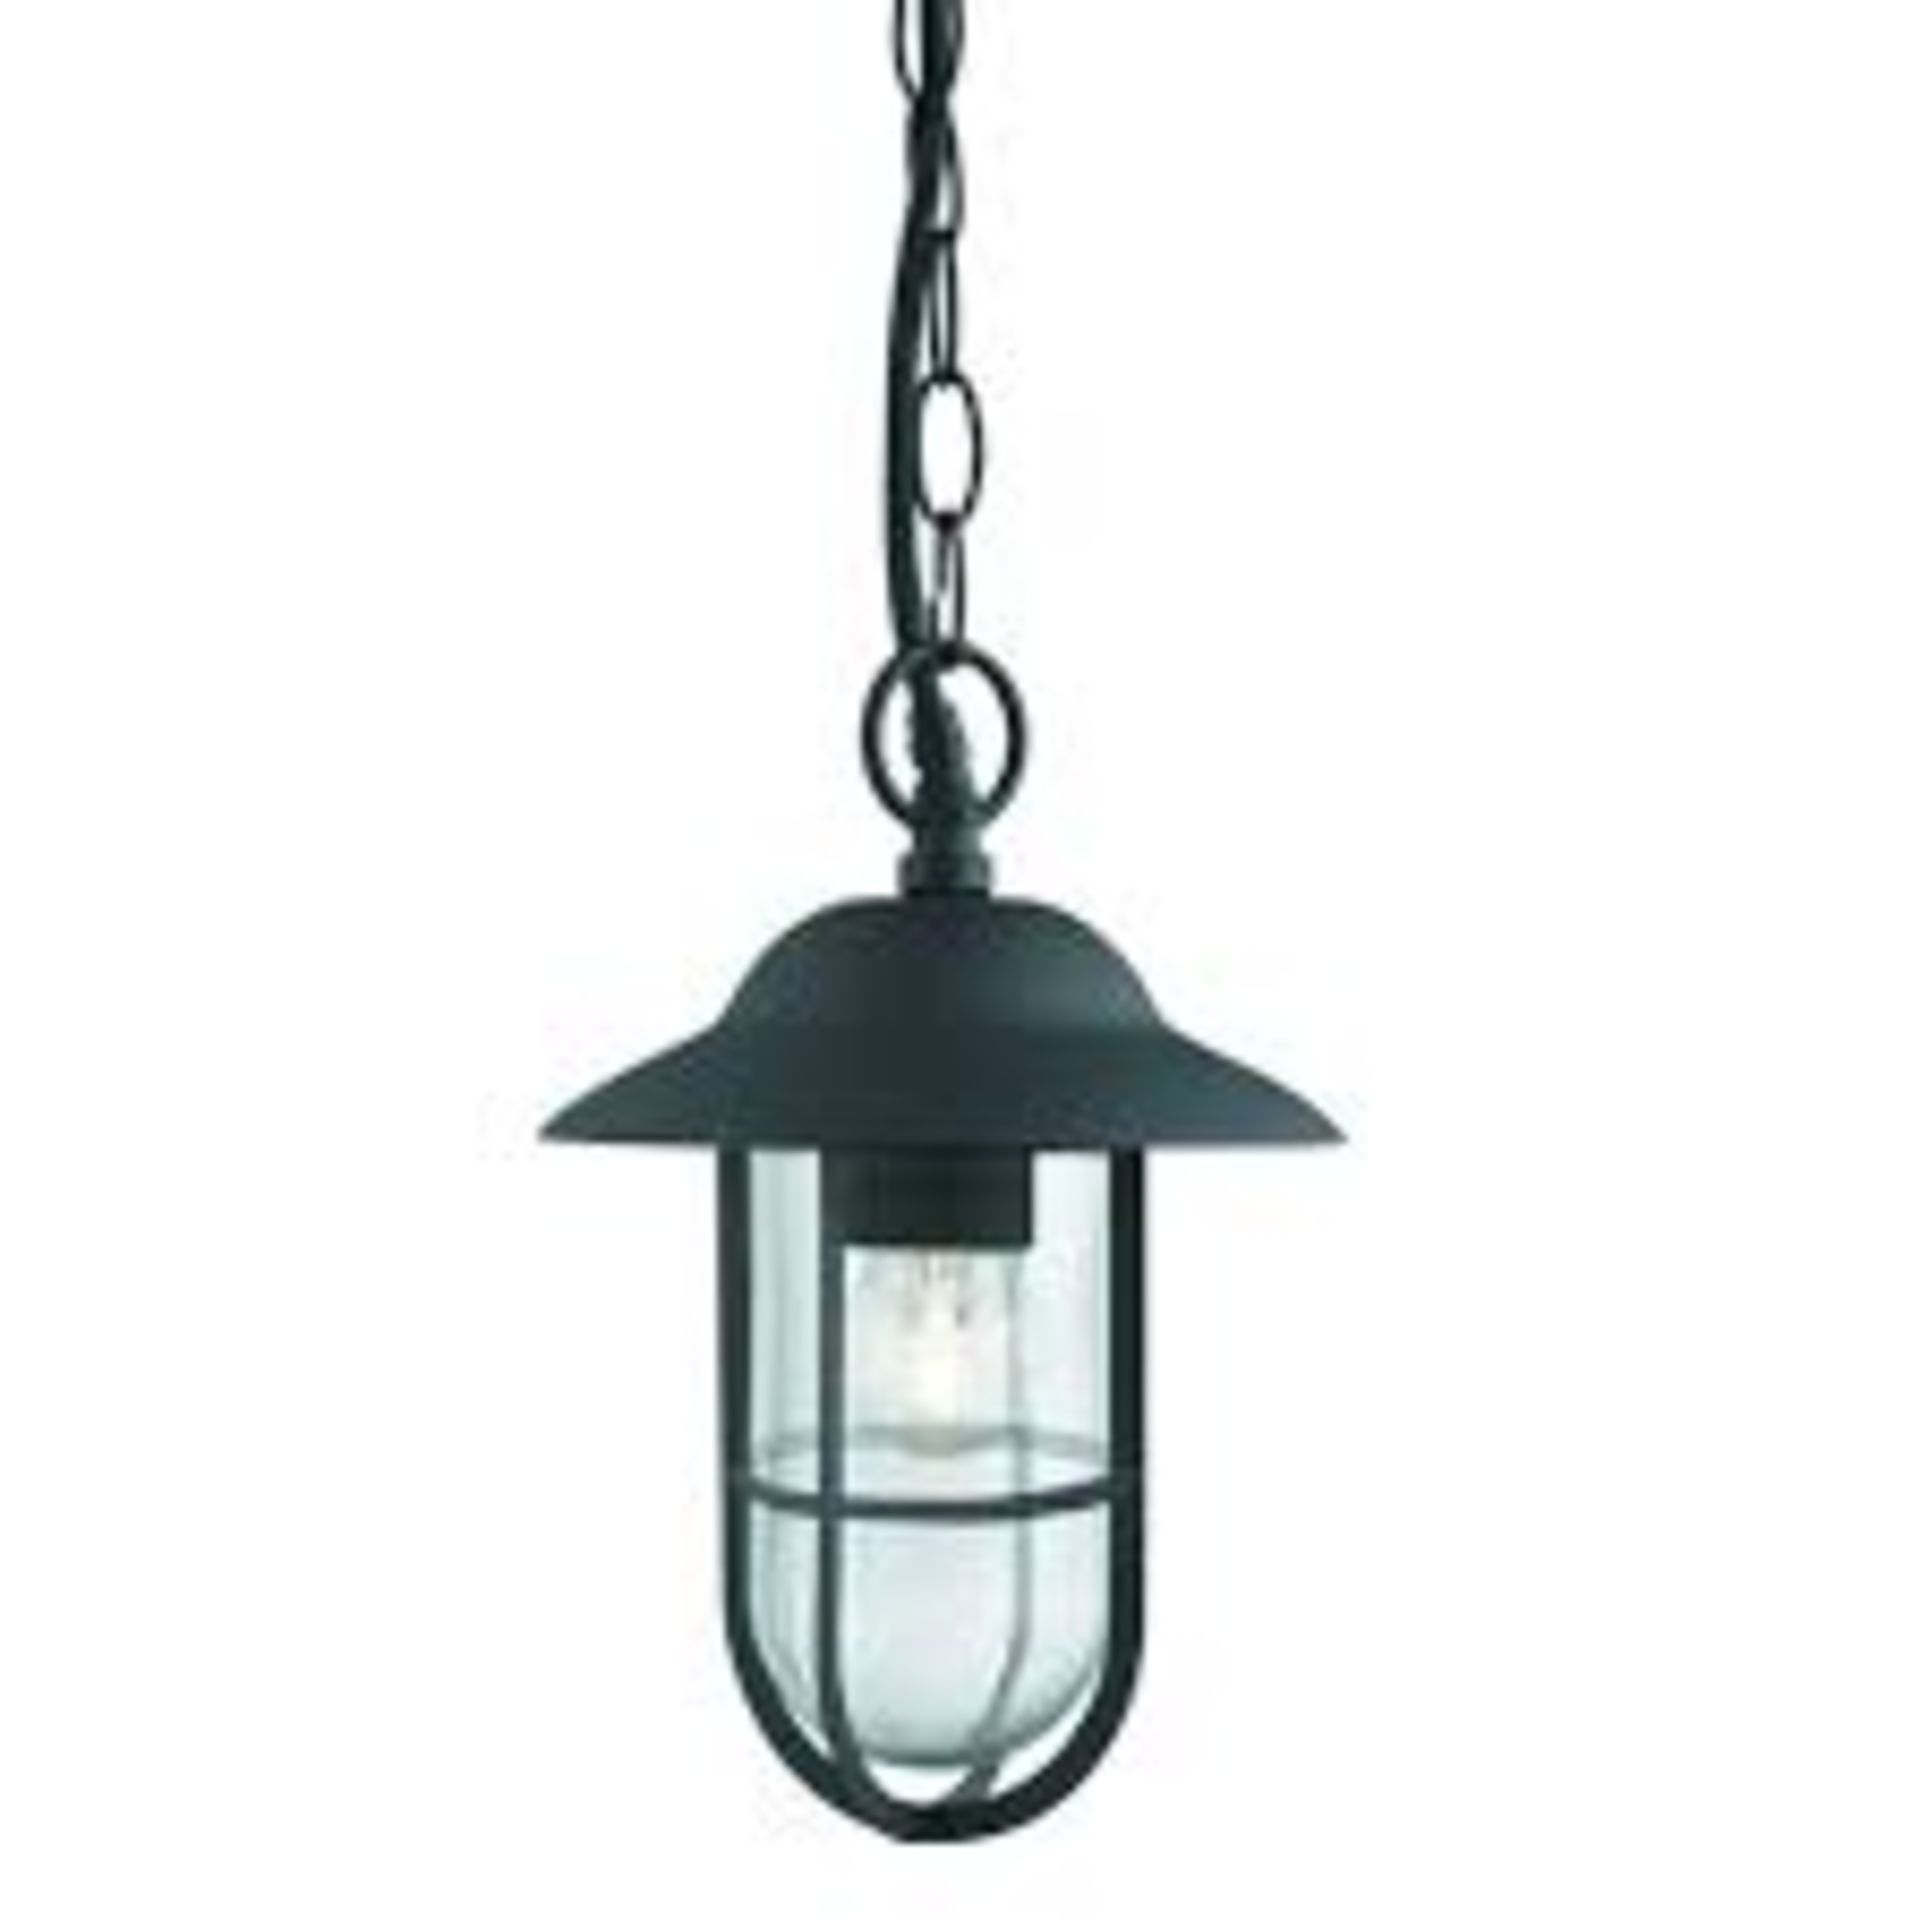 1 x Searchlight Well Glass Outdoor Pendant in matt black - Ref: 2191BK - New and Boxed - - Image 2 of 4